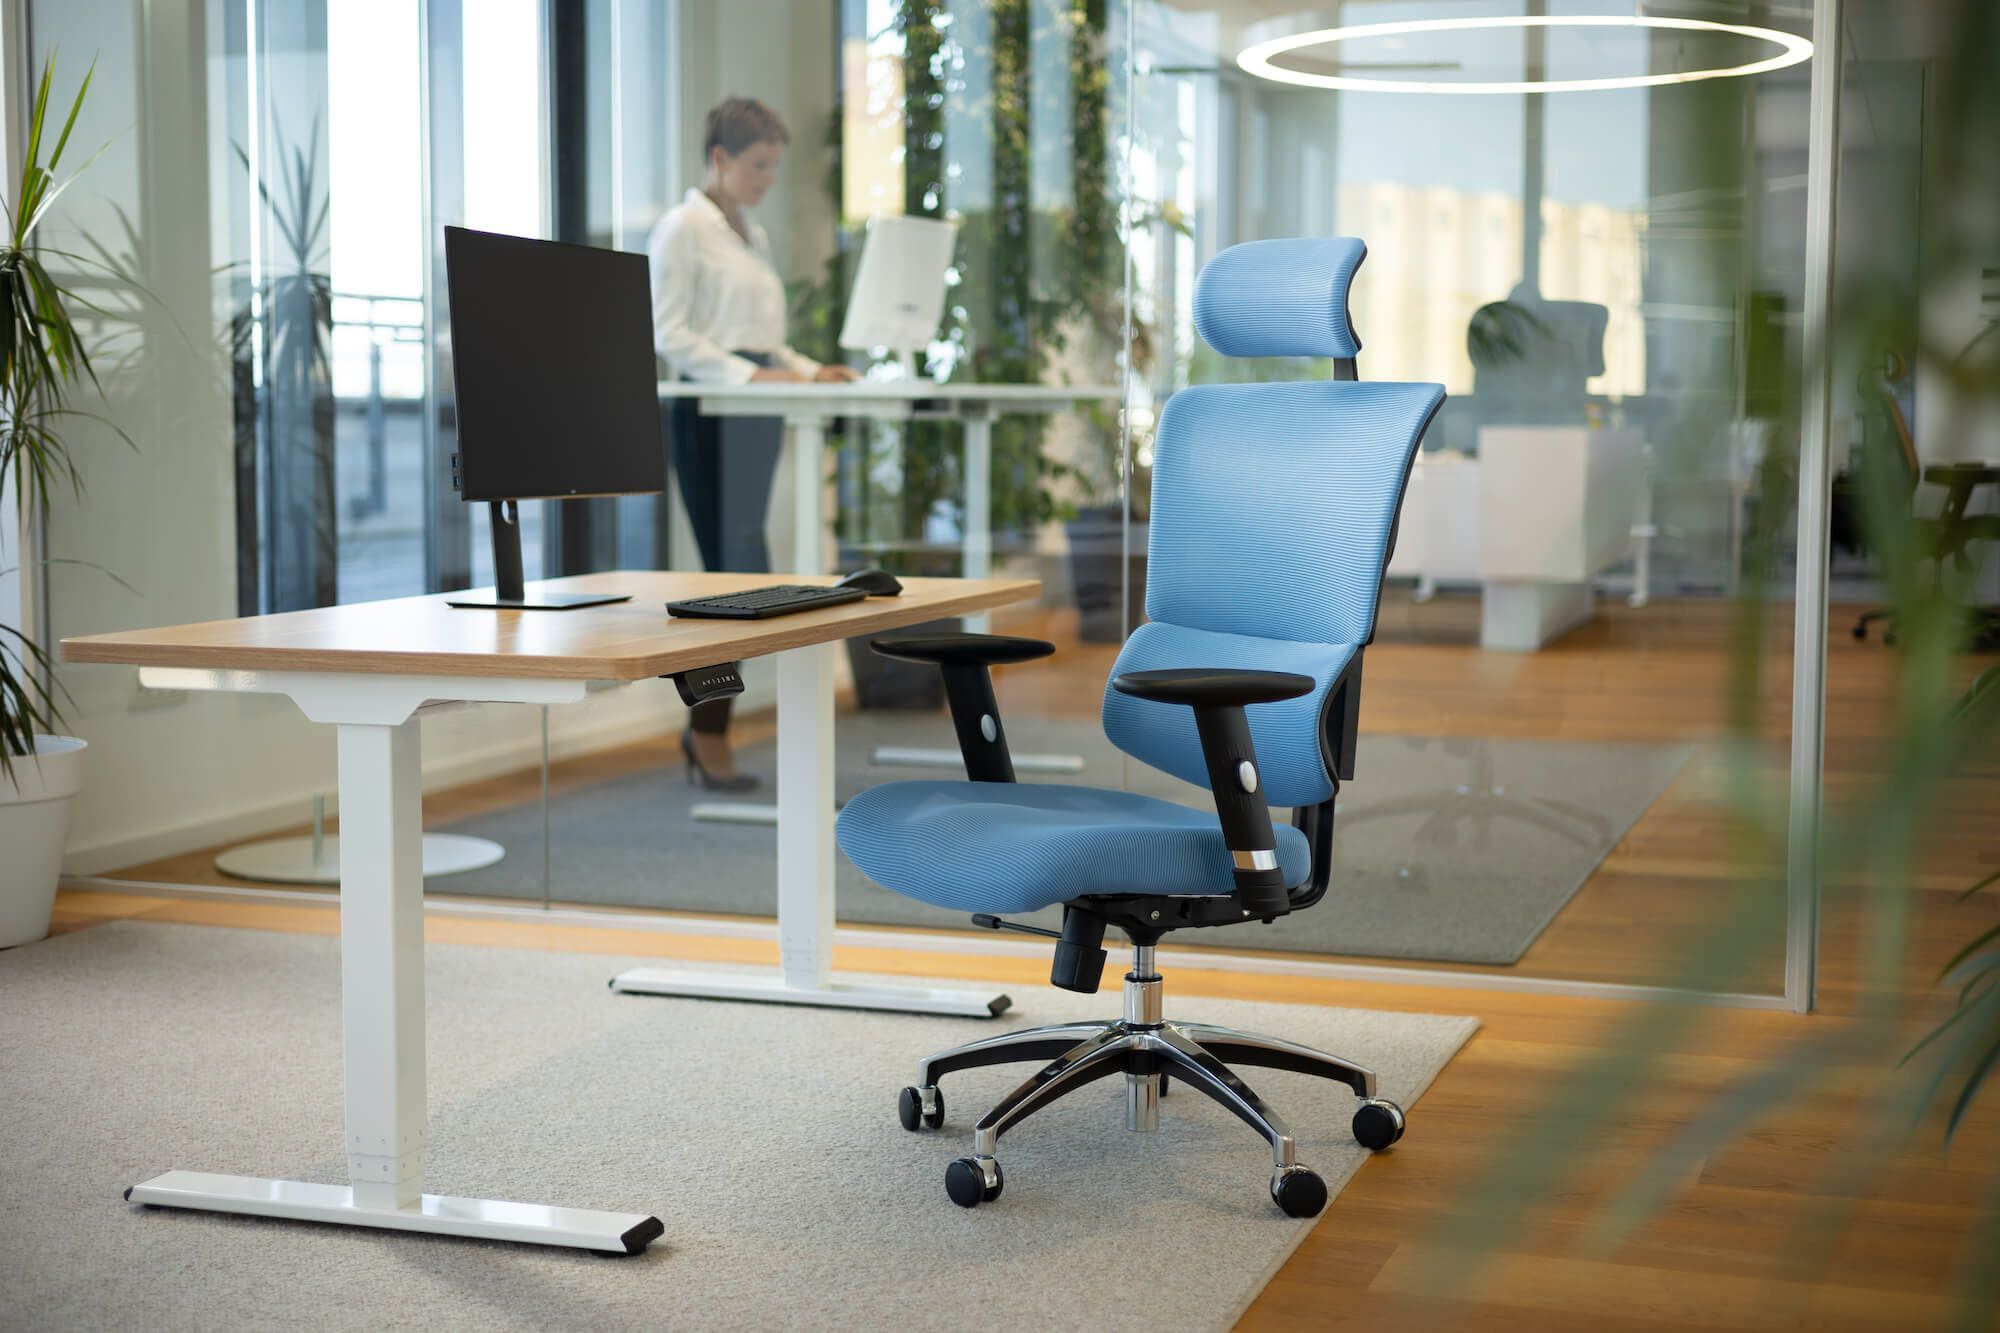 Factors that influence the prices of ergonomic office chairs in China